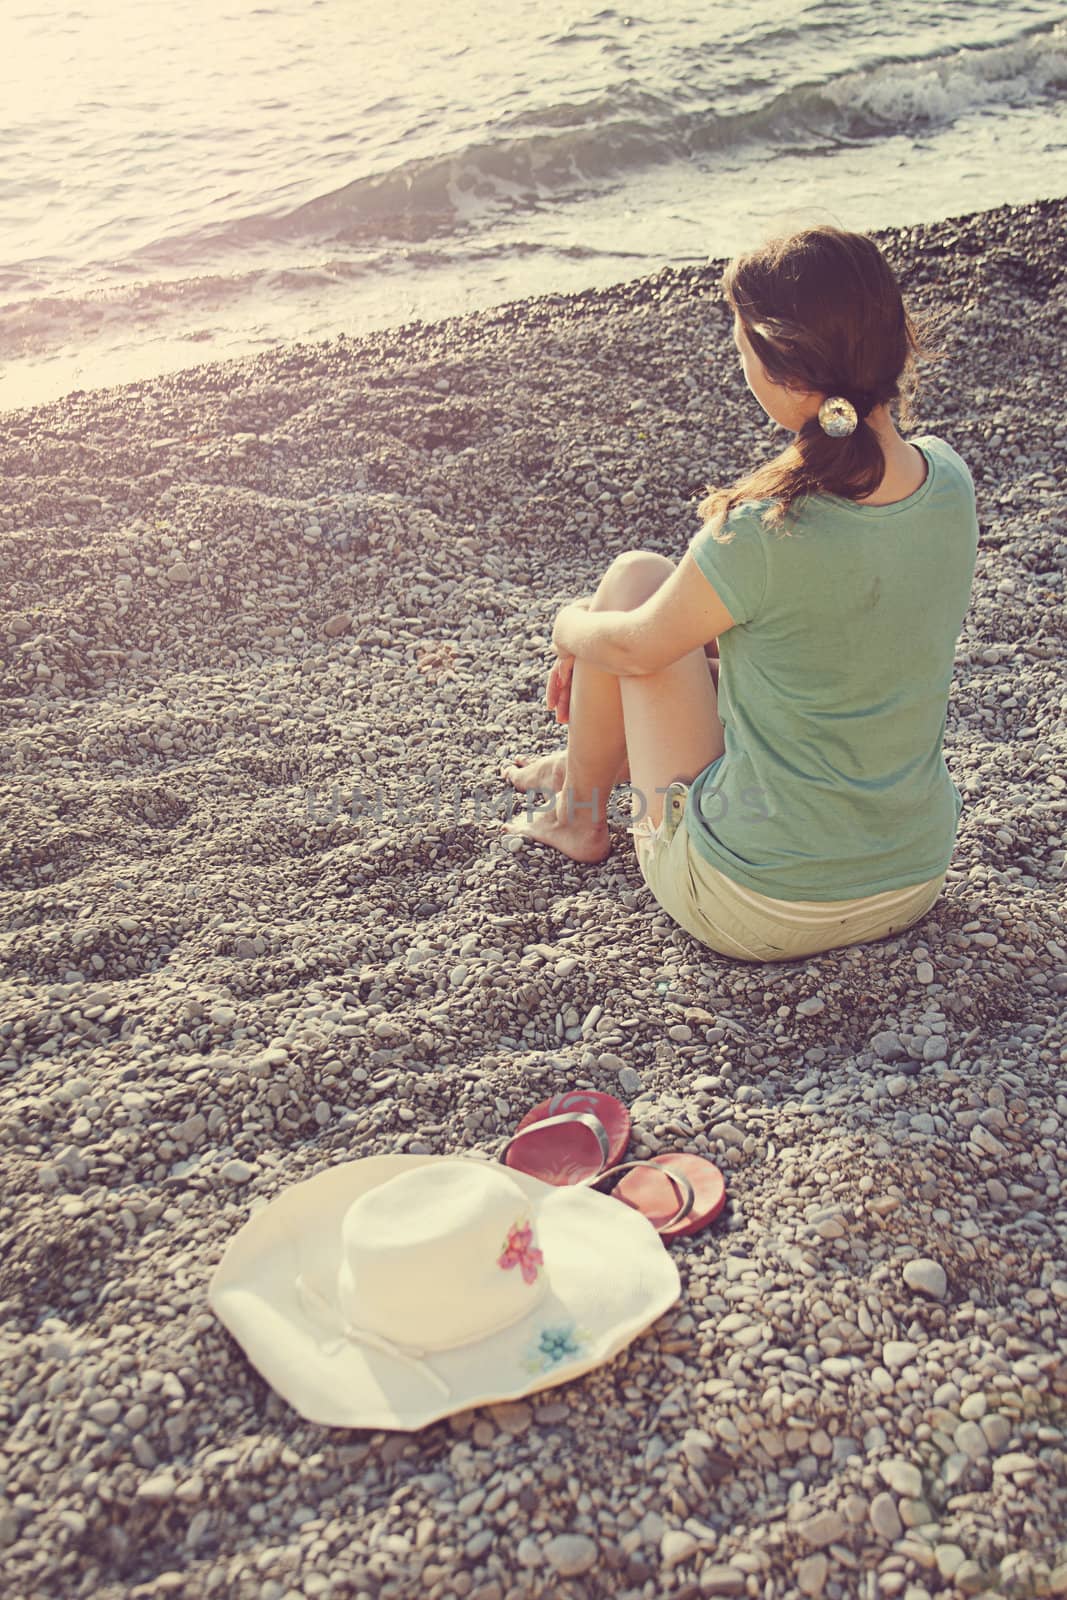 The girl is sitting on the beach and watching the sea, next to a hat and slippers